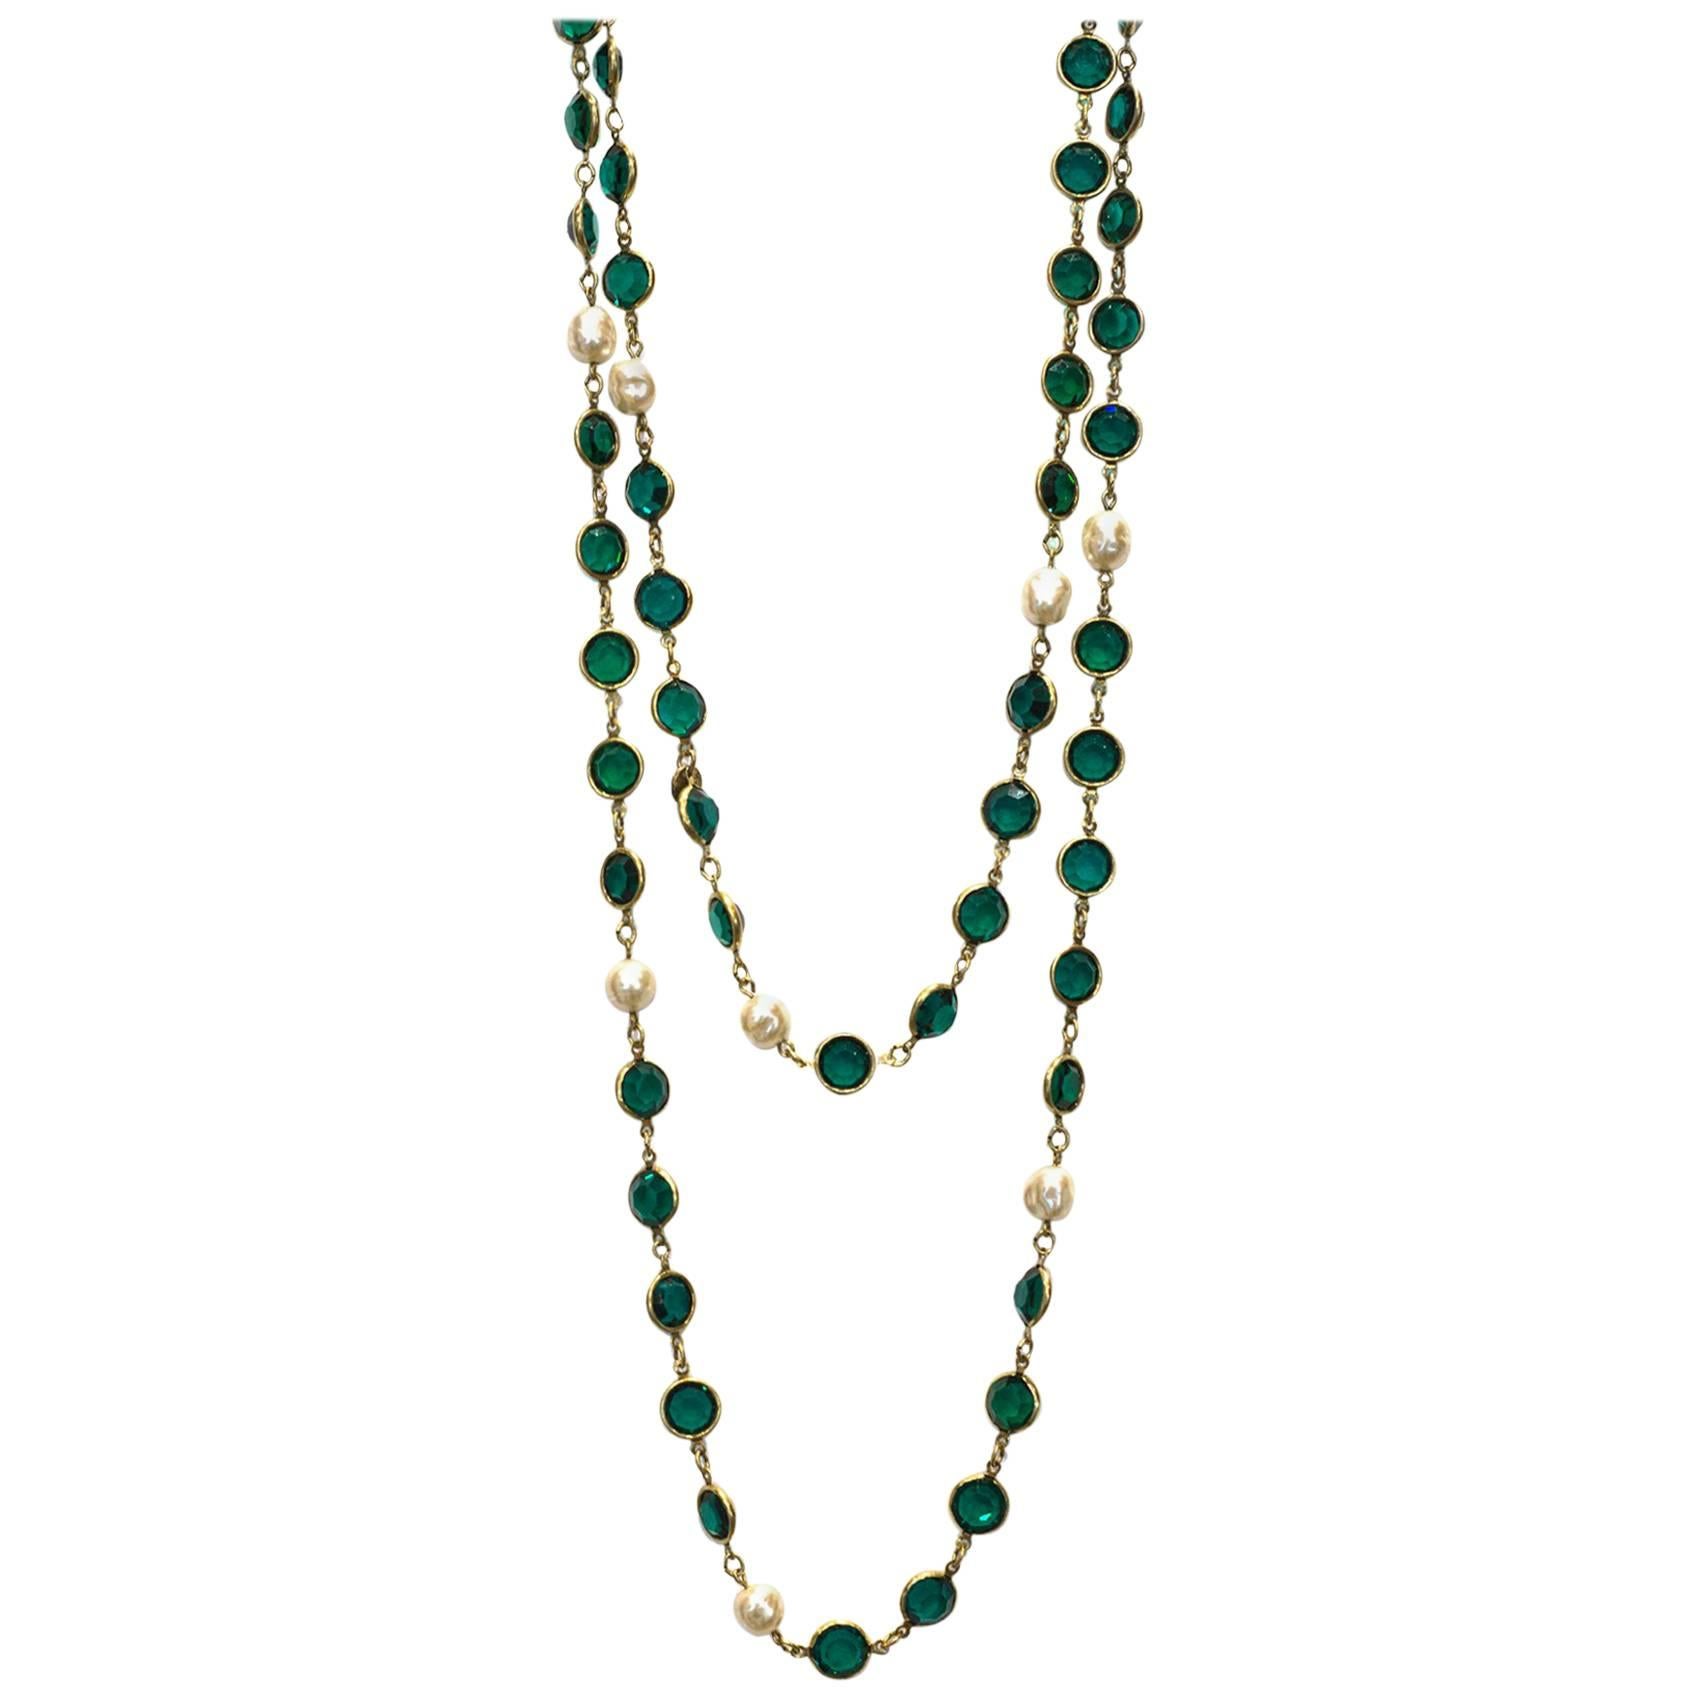 Chanel 1981 Green Crystal & Faux Pearl Sautoir Necklace with Box